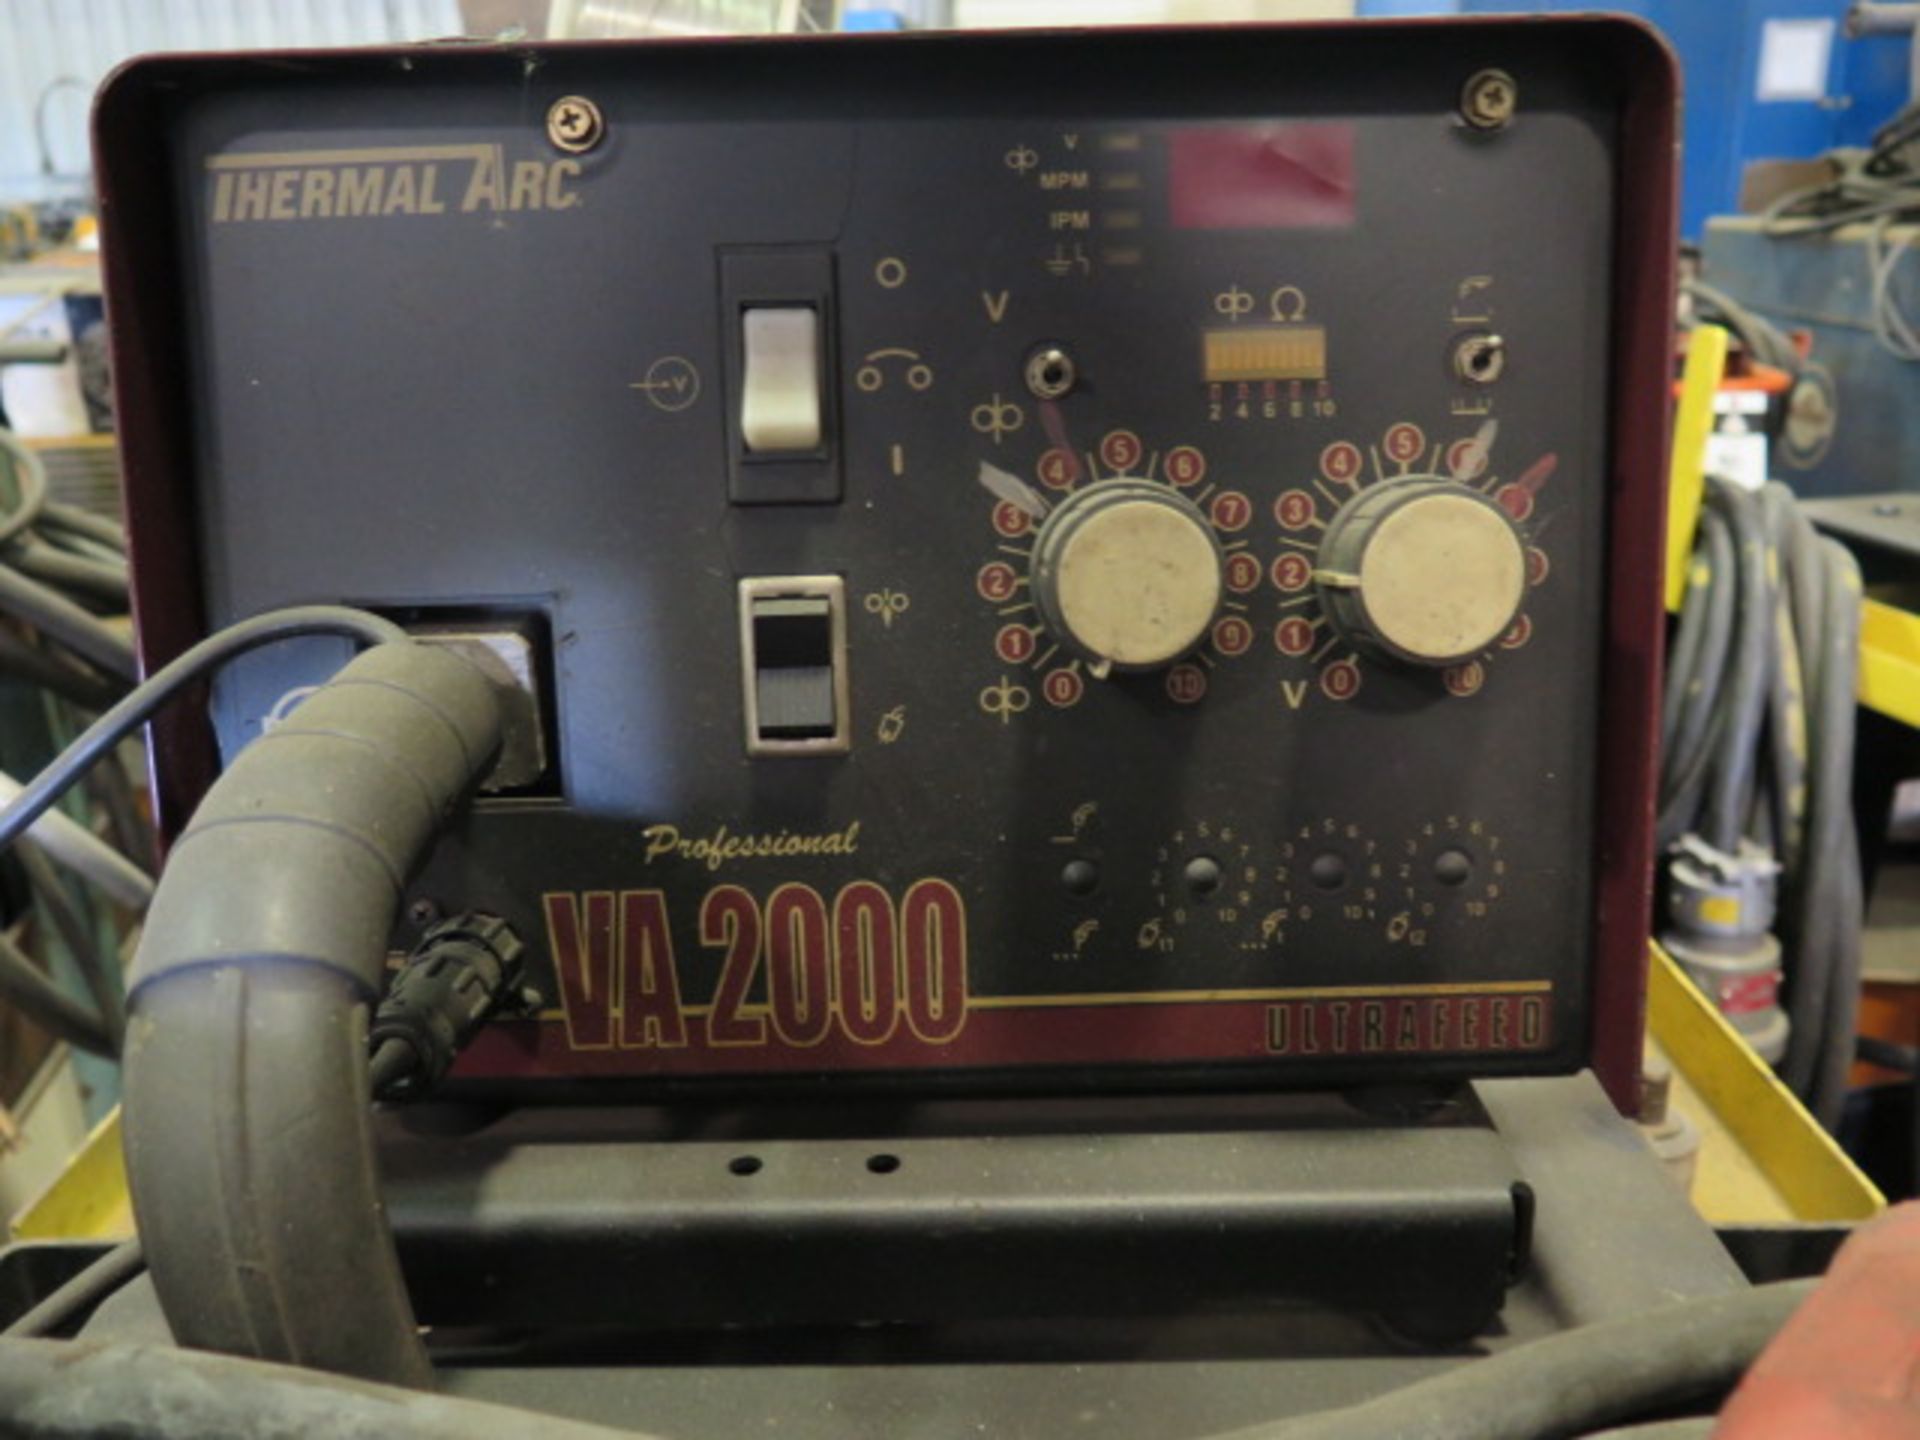 Thermal Arc 400MST Arc Welding Power Source w/ VA2000 Wire Feed (SOLD AS-IS - NO WARRANTY) - Image 5 of 8